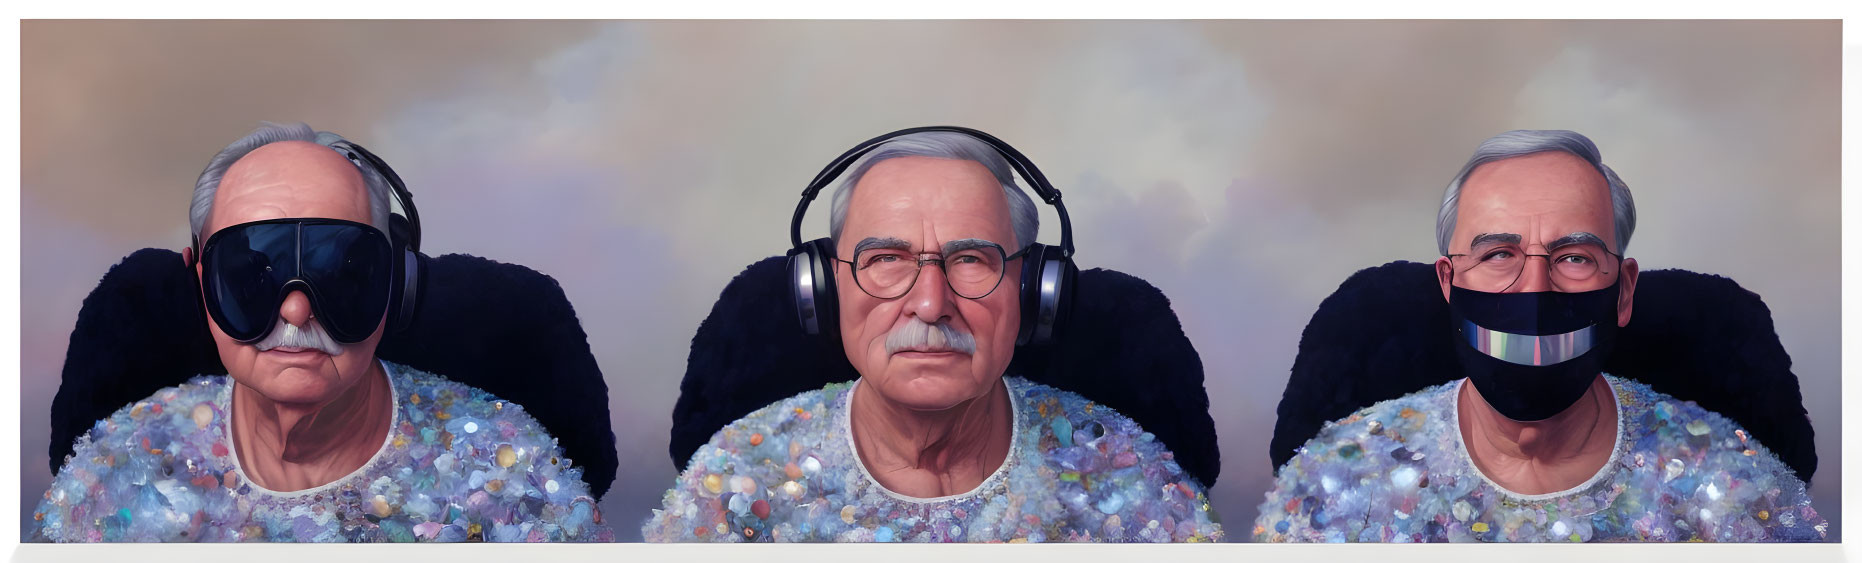 Elderly Man in VR Goggles, Glasses, and Face Mask with Glittery Jacket